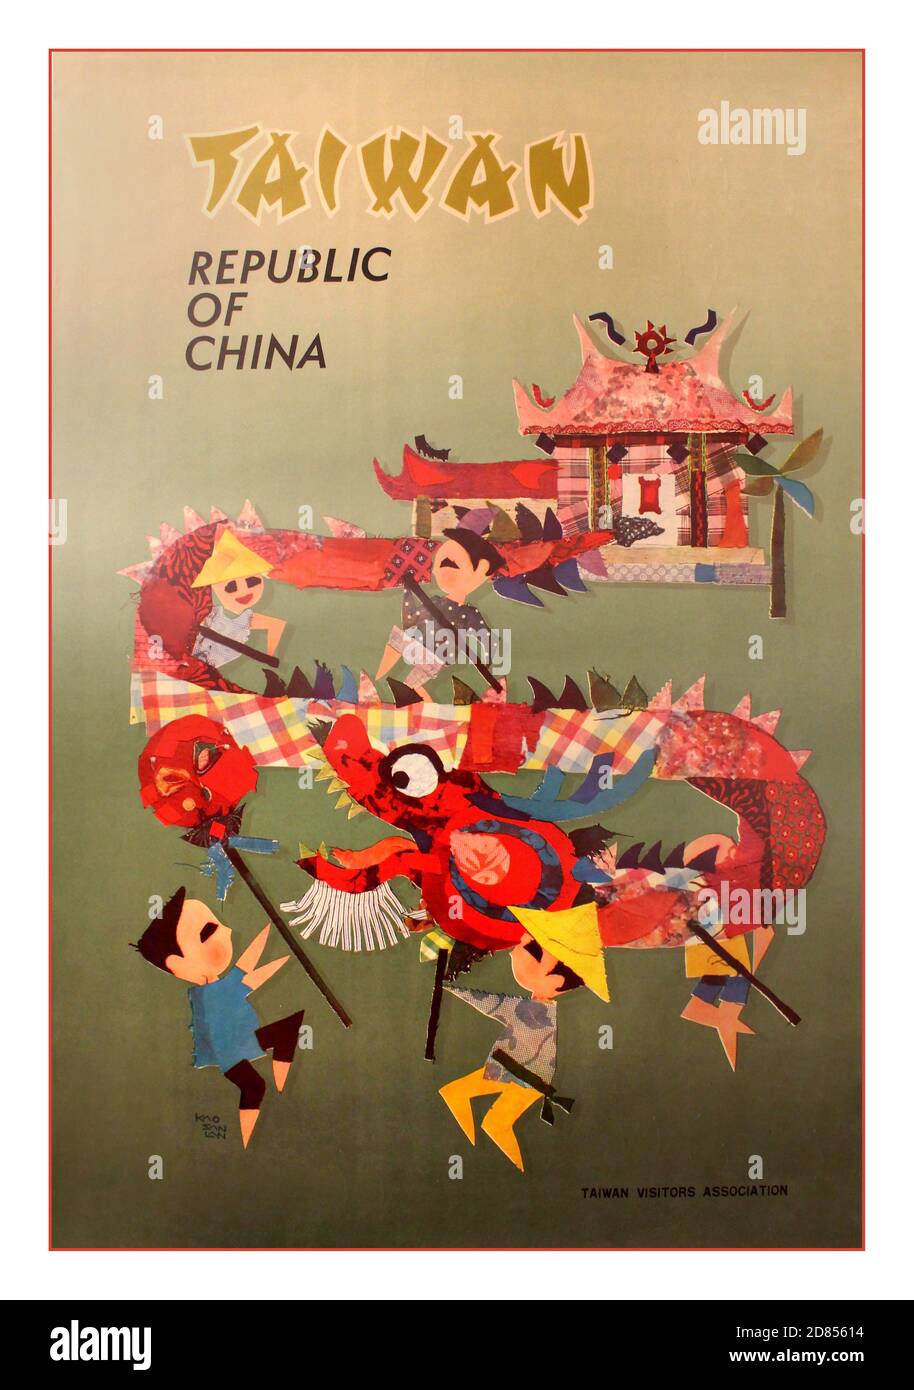 Taiwan 1960’s Republic of China Original vintage travel poster advertising Taiwan, Republic of China image of children and a dragon dance on a green background designed by Kao San Lan. Issued by the Visit Taiwan Association. Printed by Ming Ho Art Press, Taipei.  Travel Poster, Taiwan, 1960s, design by Kao San Lan Stock Photo